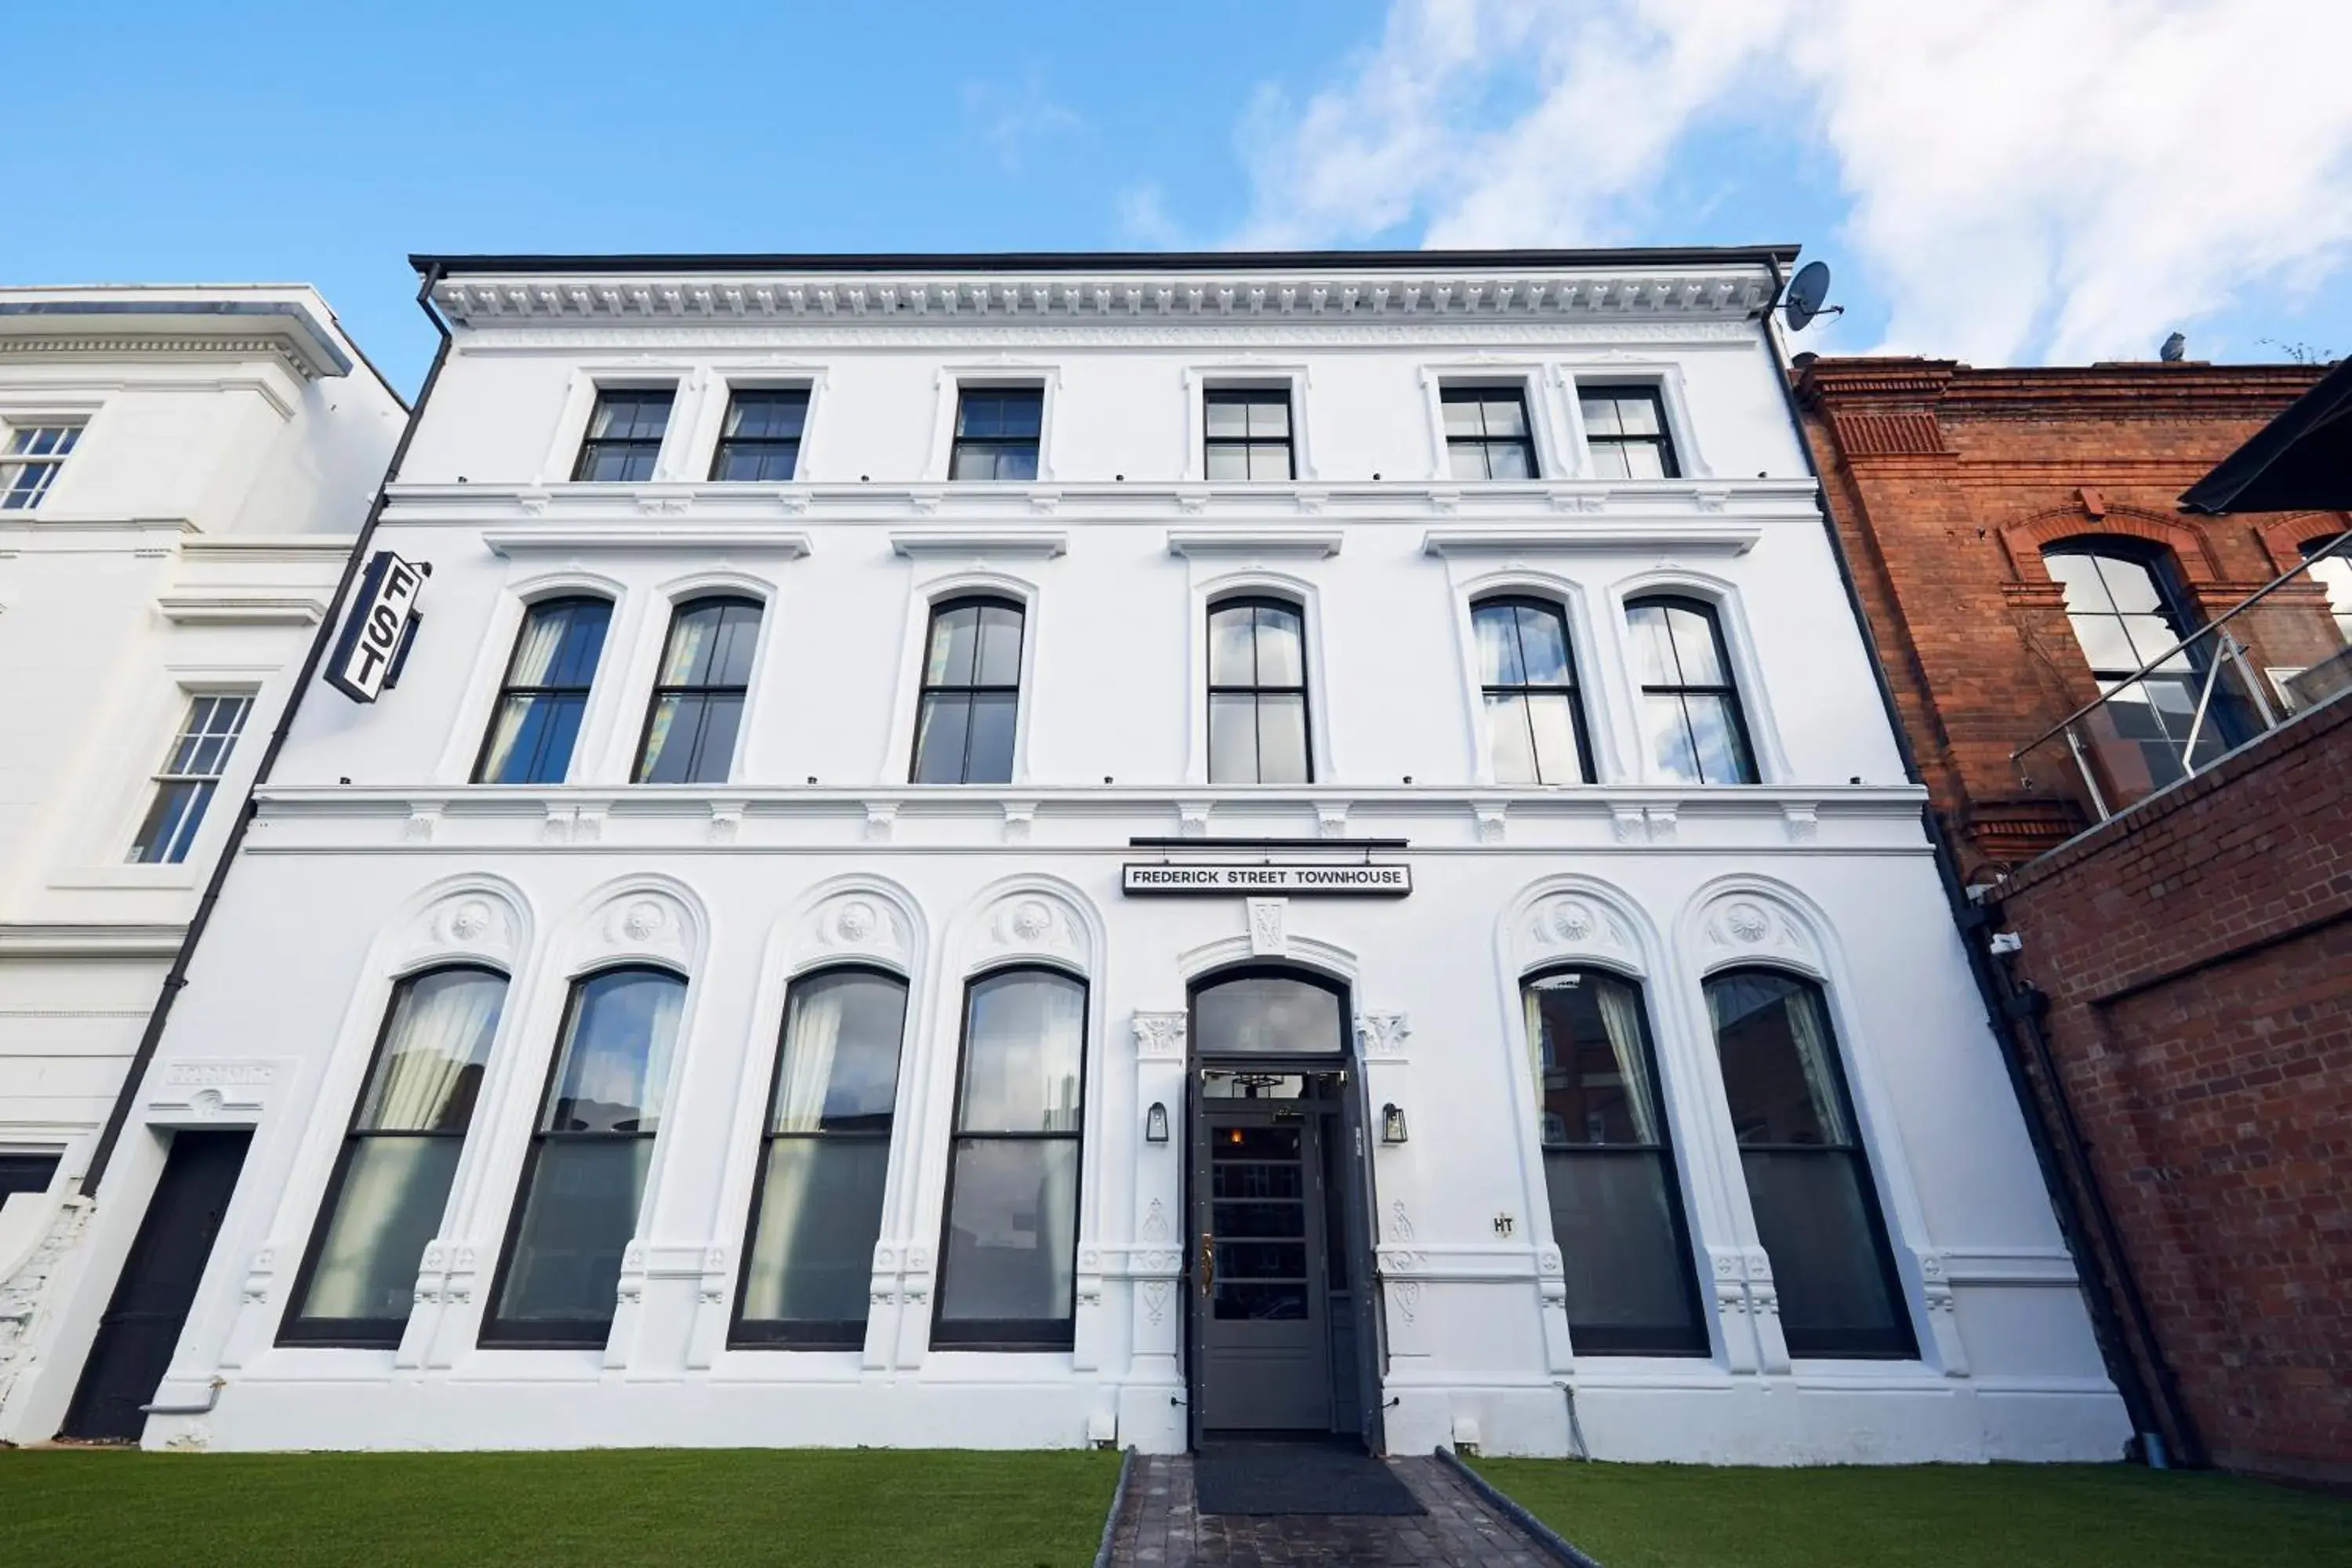 Facade/entrance, Property Building in Frederick Street Townhouse